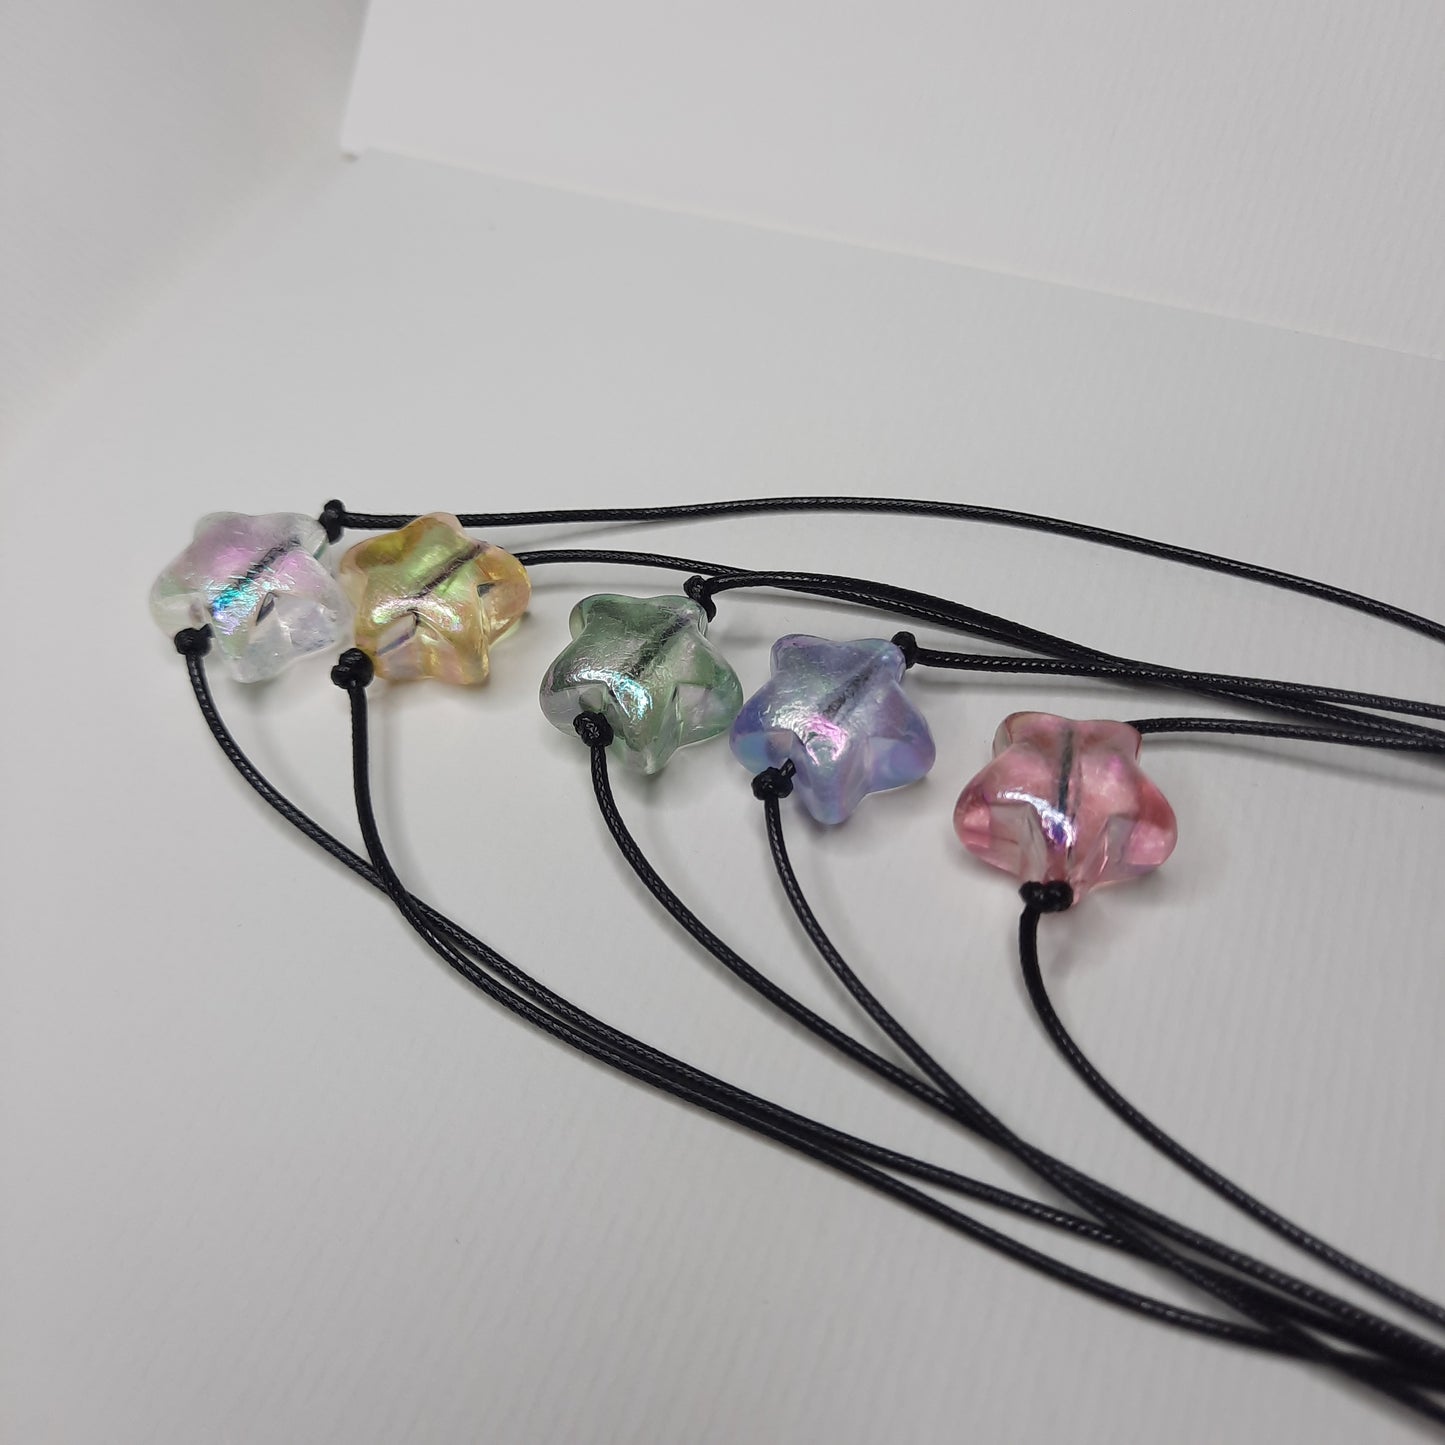 Konpeito Jelly Star Necklace (White, Yellow, Pink, Green, Lavender Blue)